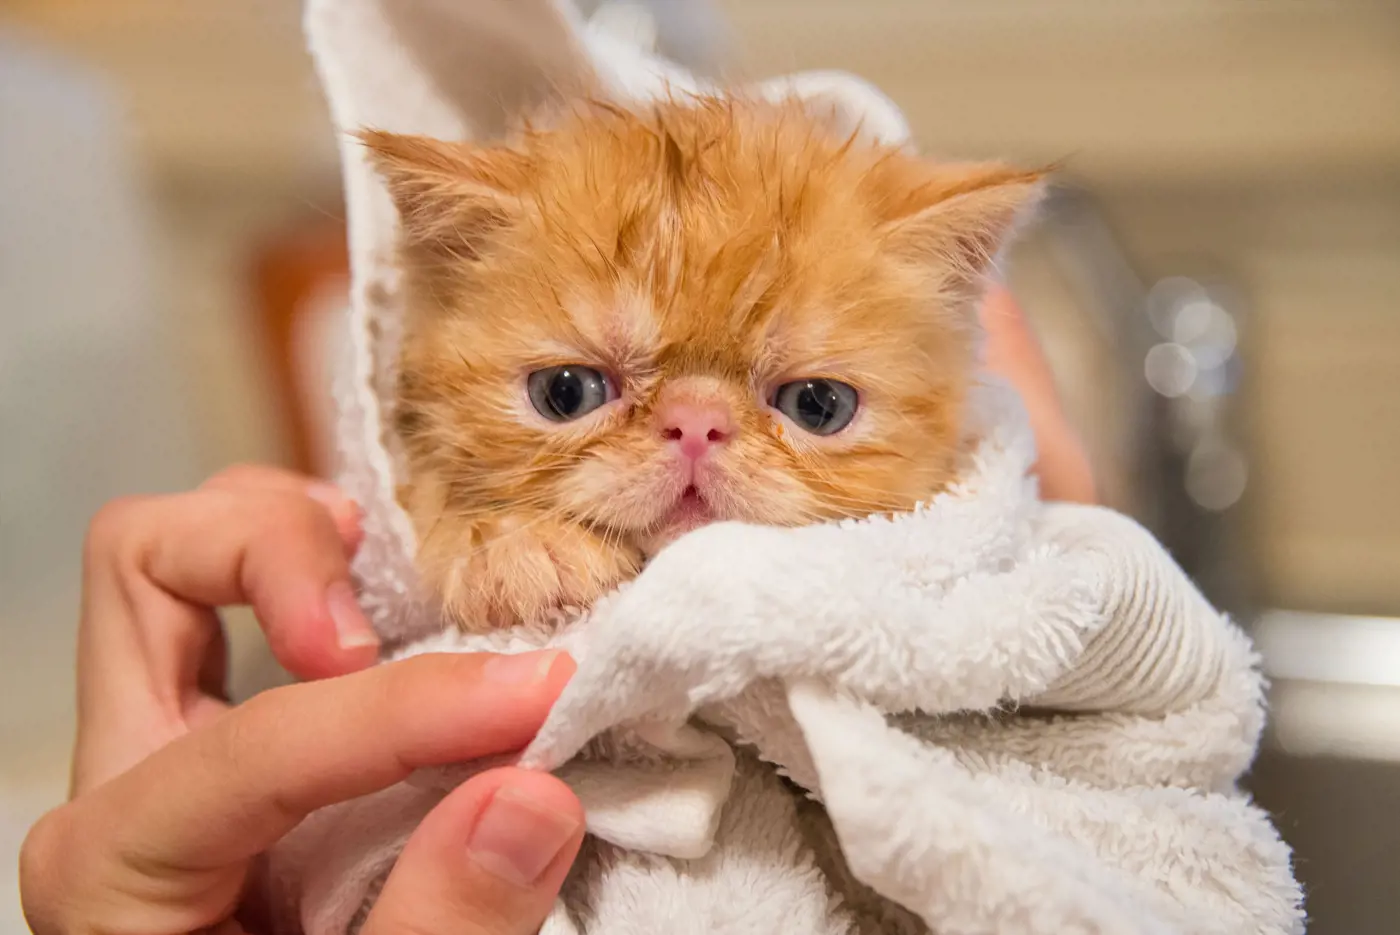 A fluffy ginger kitten wrapped in a towel